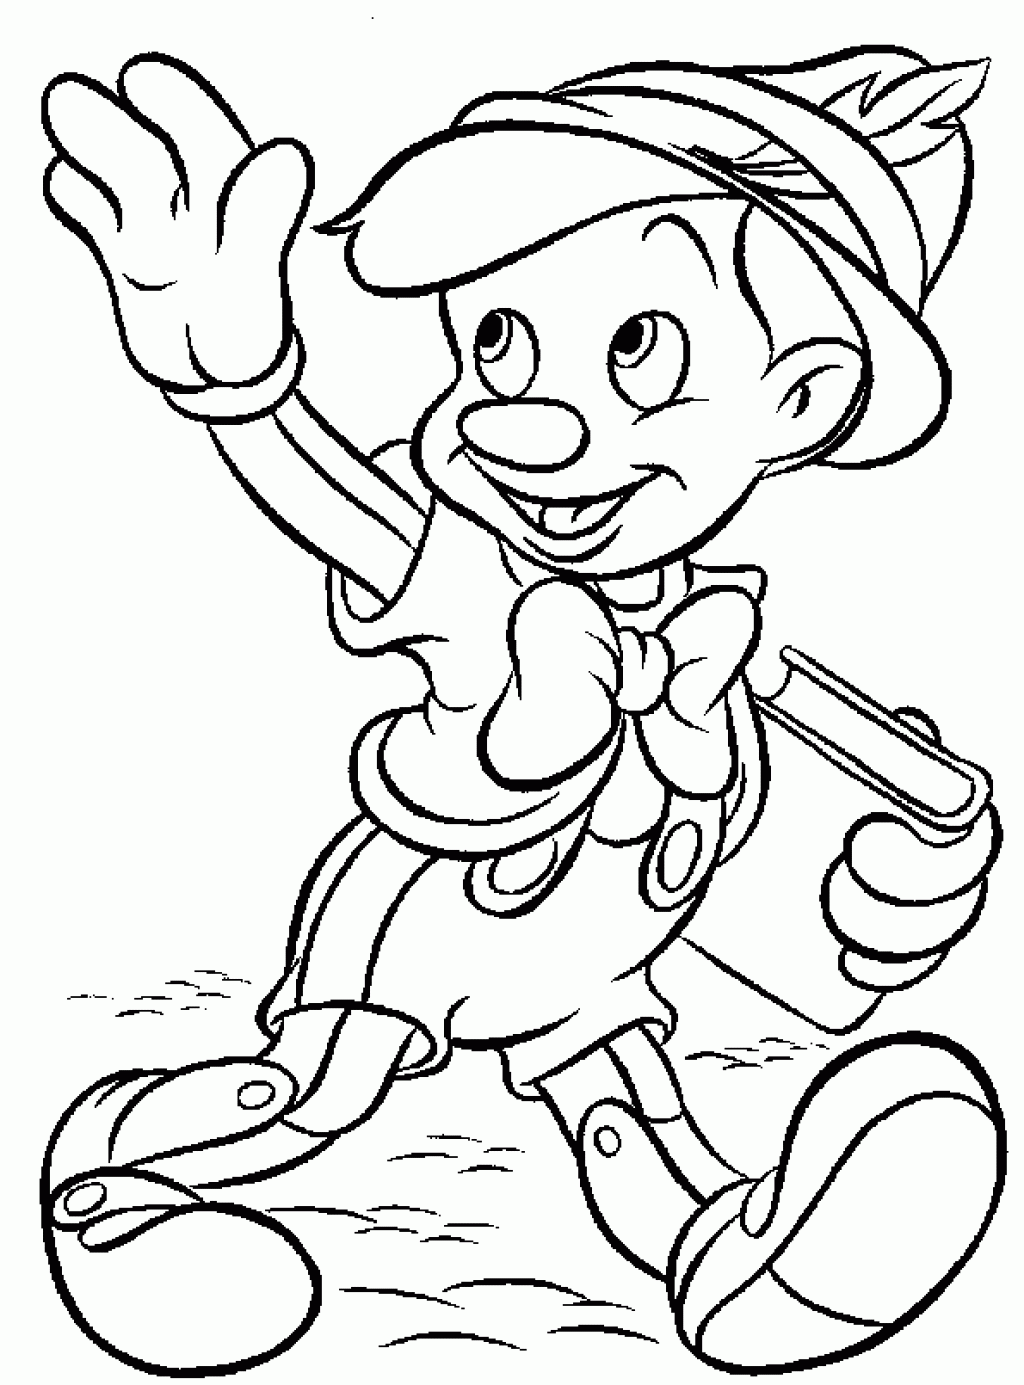  Coloring Sheets For Kids Printable For Free 10